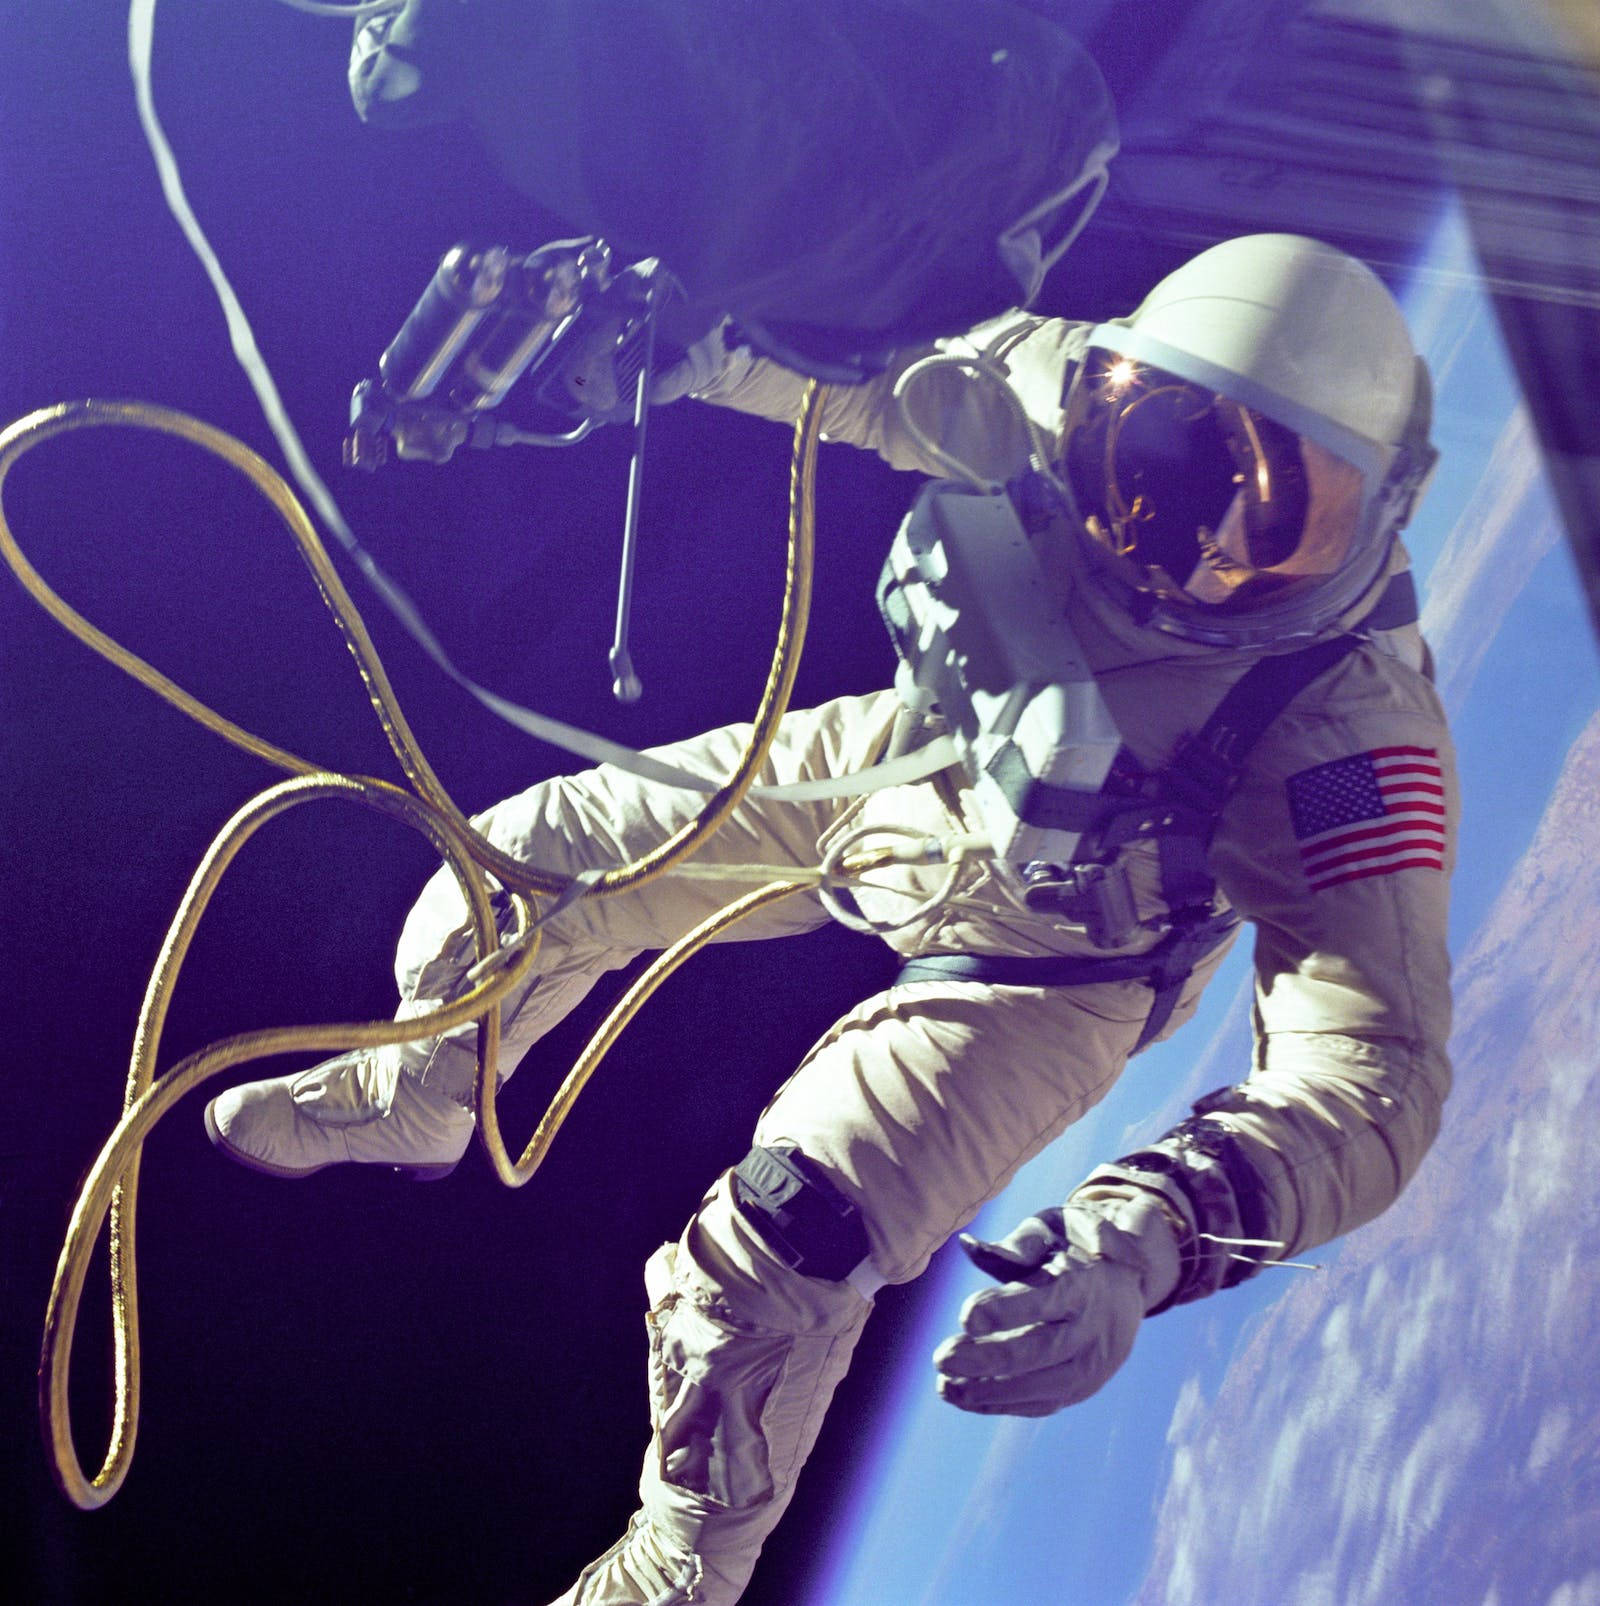 Edward White An Astronaut In Space